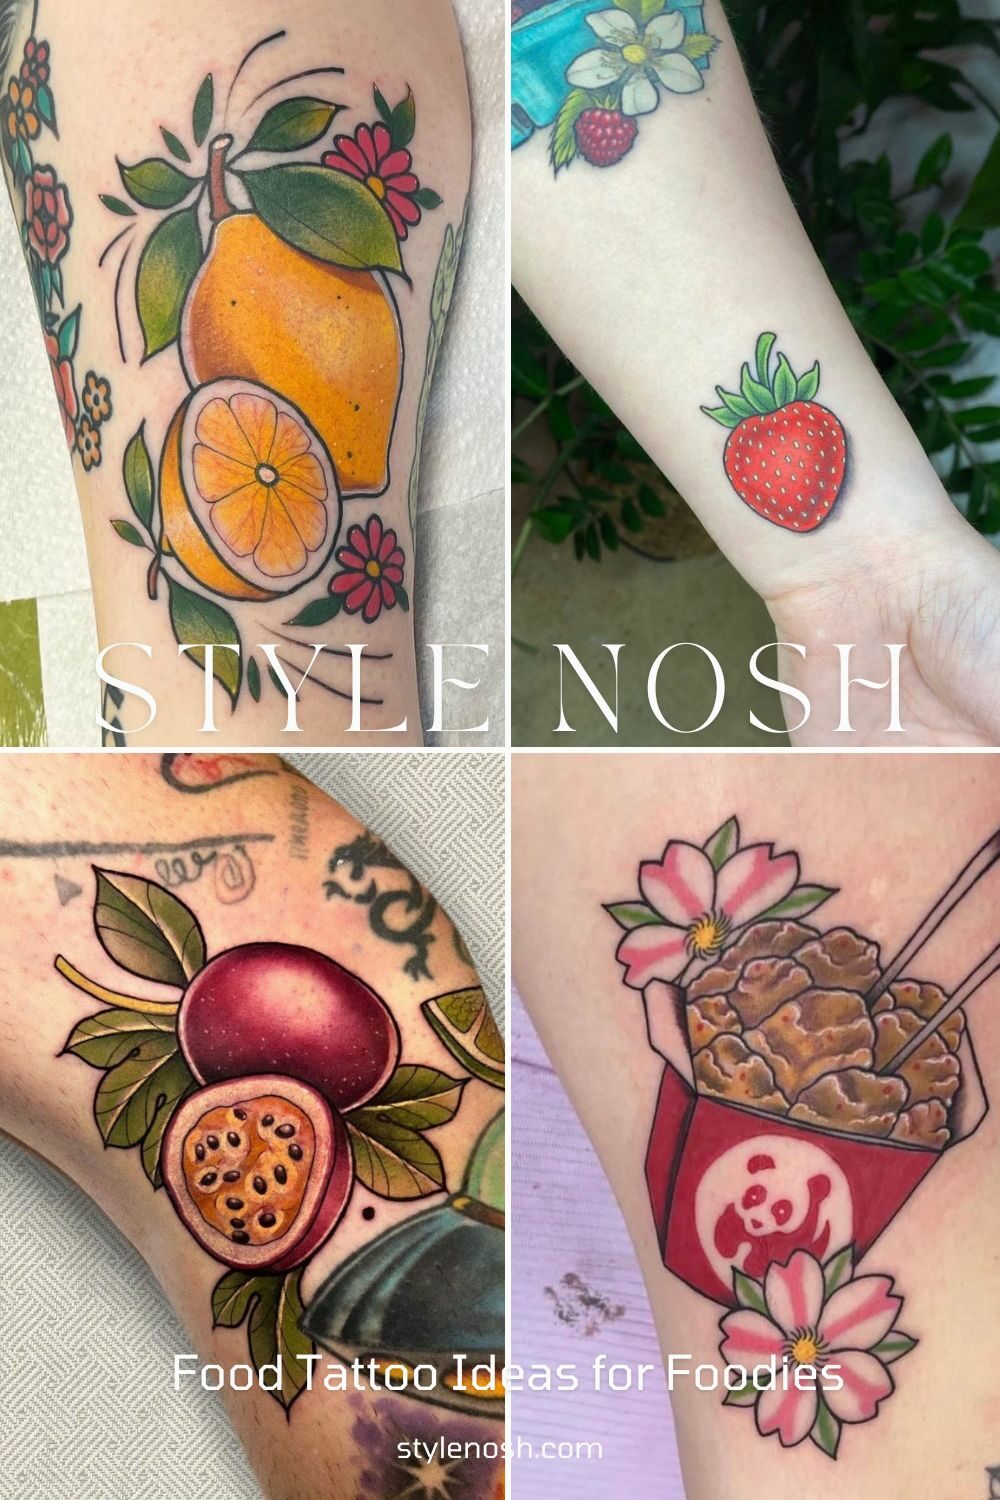 These food tattoos have a touch of color and would look great on your wrist